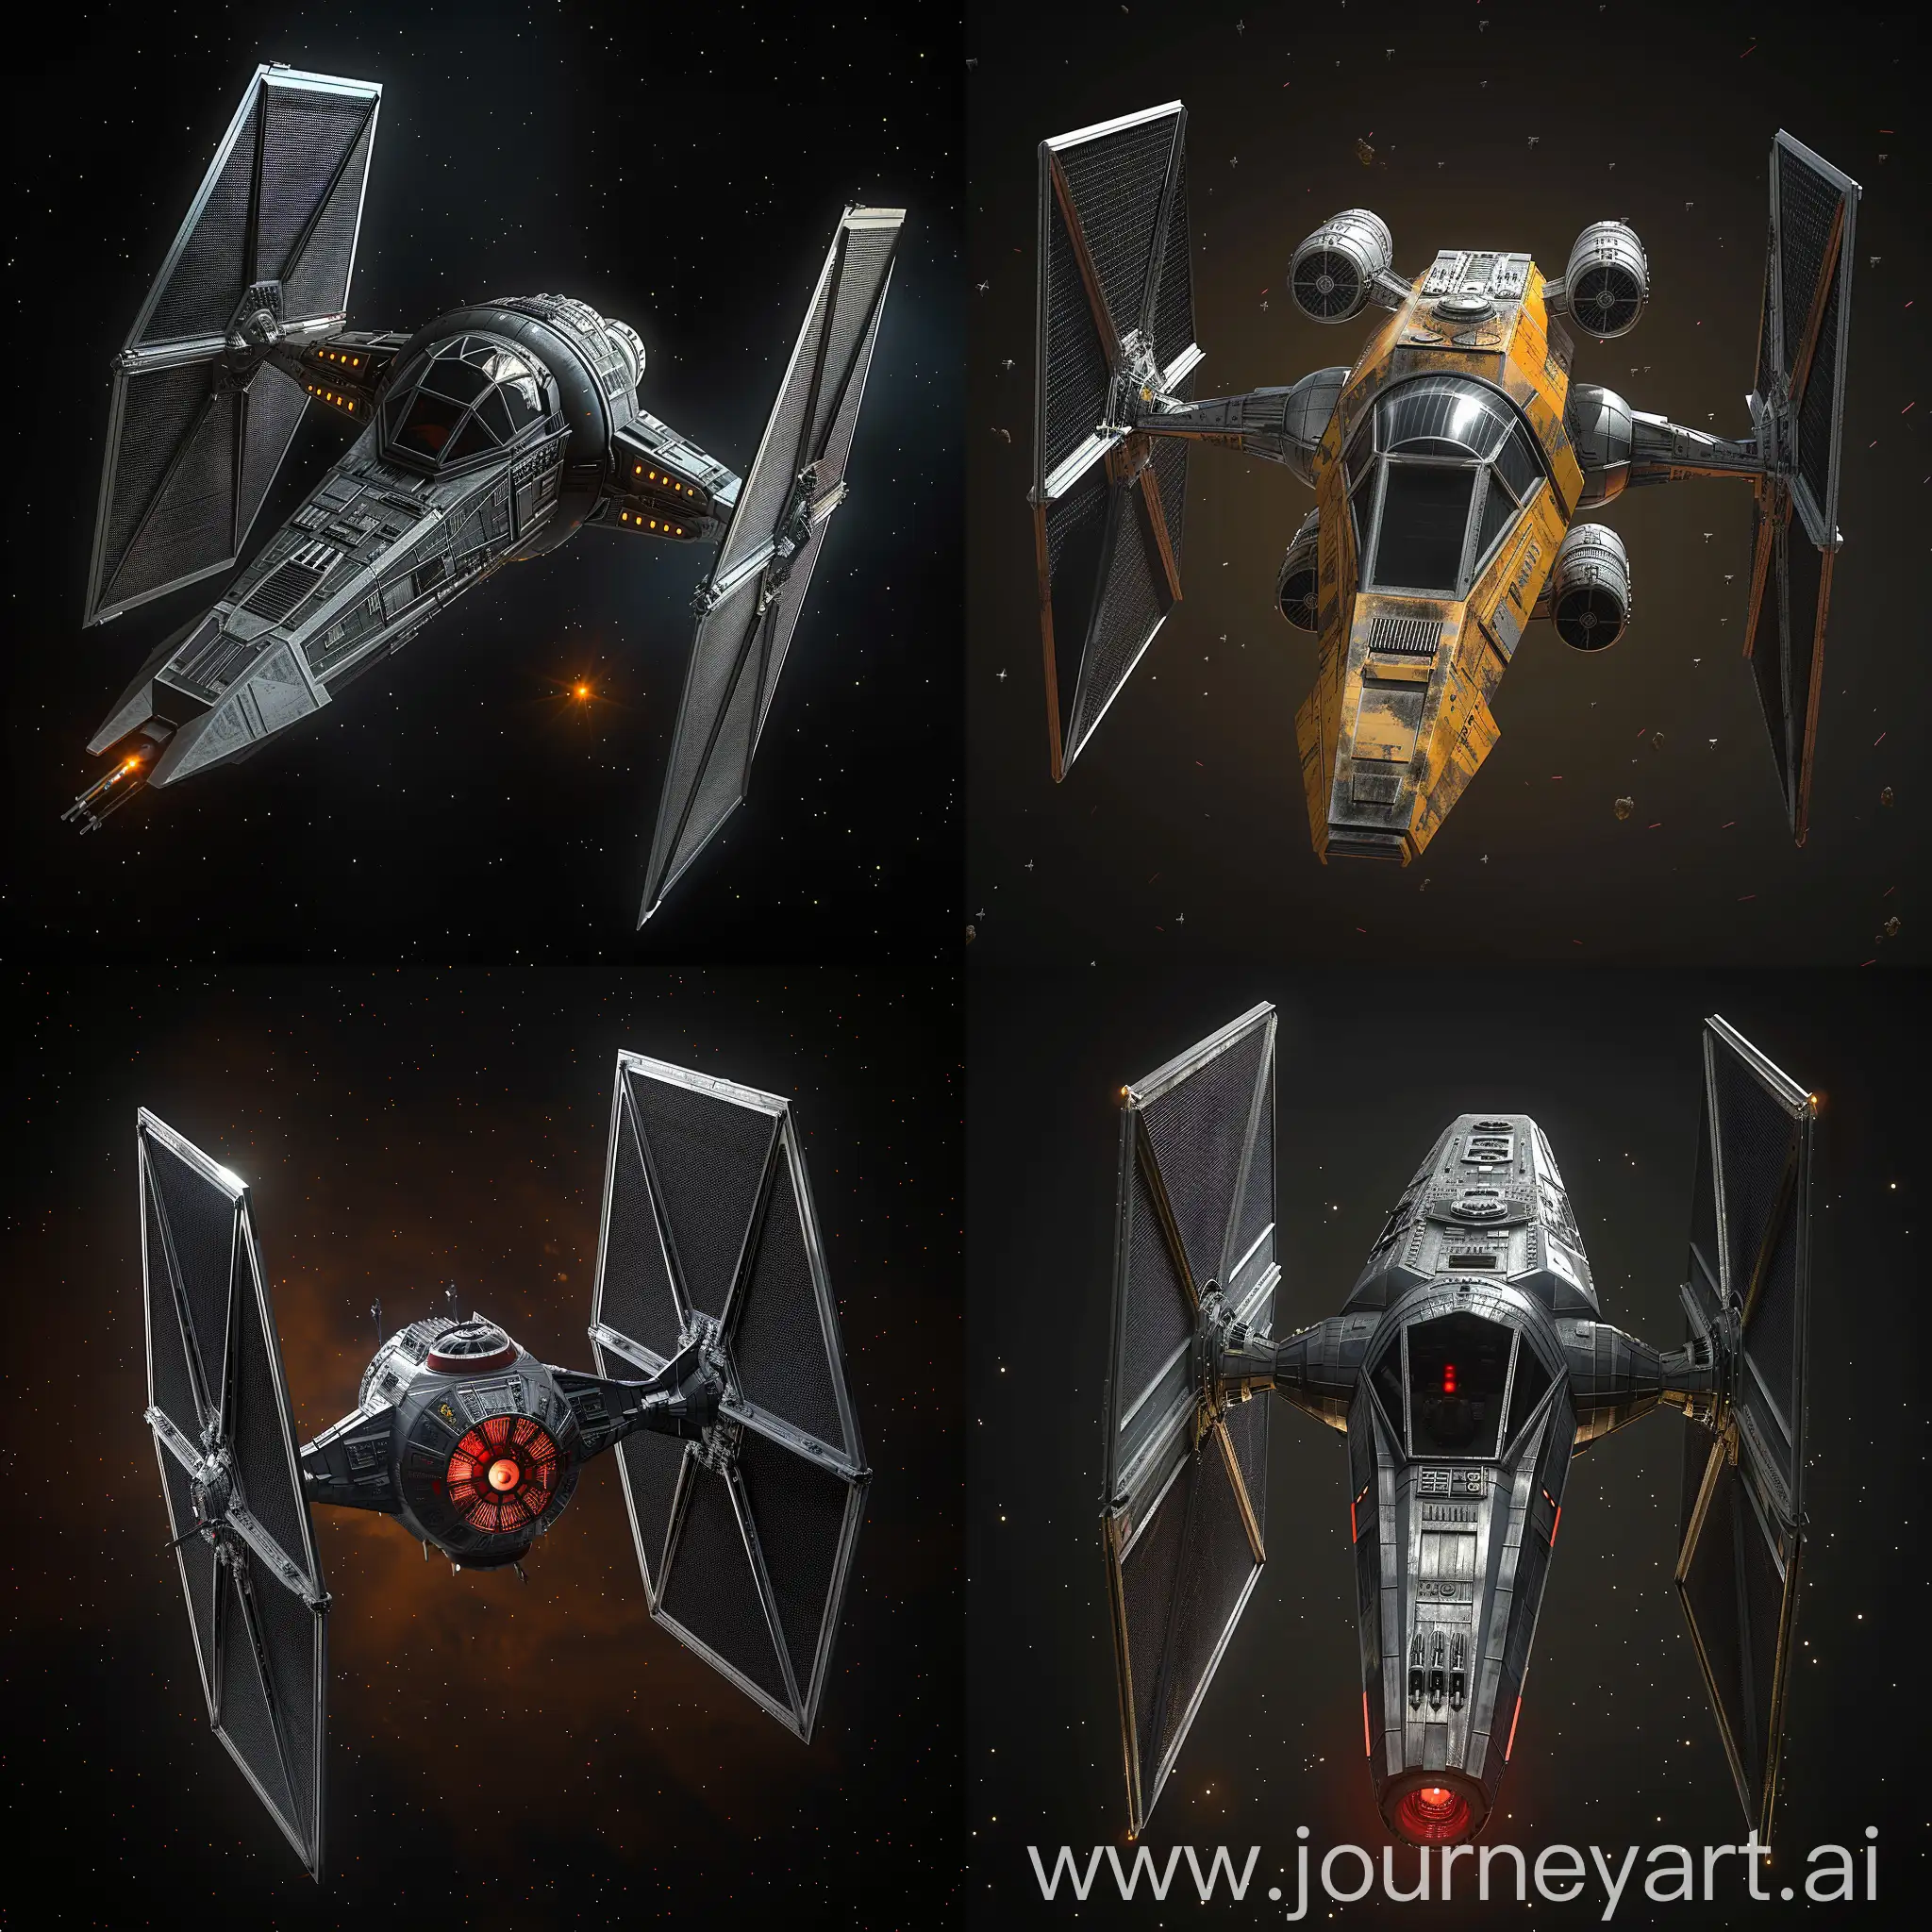 Futuristic Star Wars TIE Fighter https://netrinoimages.s3.eu-west-2.amazonaws.com/2005/05/06/1656/116481/star_wars_tie_fighter_with_interior_3d_model_c4d_max_obj_fbx_ma_lwo_3ds_3dm_stl_1415695_o.jpg, Solar Panels, Regenerative Braking, Lightweight Materials, Aerodynamic Design, Efficient Engines, Energy Management System, LED Lighting, Power-Generating Wings, Energy Storage Systems, Smart Sensors and Controls, Advanced AI Piloting System, Stealth Technology, Holographic Heads-Up Display, Advanced Weapon Systems, Adaptive Camouflage, Quantum Shielding, Hyperspace Jump Drive, Neural Interface Controls, Self-Repairing Nanotechnology, Quantum Entanglement Communication, Nanomaterial Armor, Self-Healing Coatings, Nanosensors, Nanorobotics Repair System, Nanoparticle Thrusters, Nanoscale Energy Harvesting, Nanocomposite Materials, Nanophotonic Cloaking, Nanoscale Communication Network, Nanoscale Weapons Systems, Bio-inspired Design, Bioluminescent Markings, Bioengineered Defense Mechanisms, Biometric Security Systems, Bio-adaptive Camouflage, Bio-sensors, Biodegradable Materials, Bio-inspired Propulsion Systems, Genetic Engineering for Enhanced Performance, Bio-nanotechnology Integration, octane render --stylize 1000